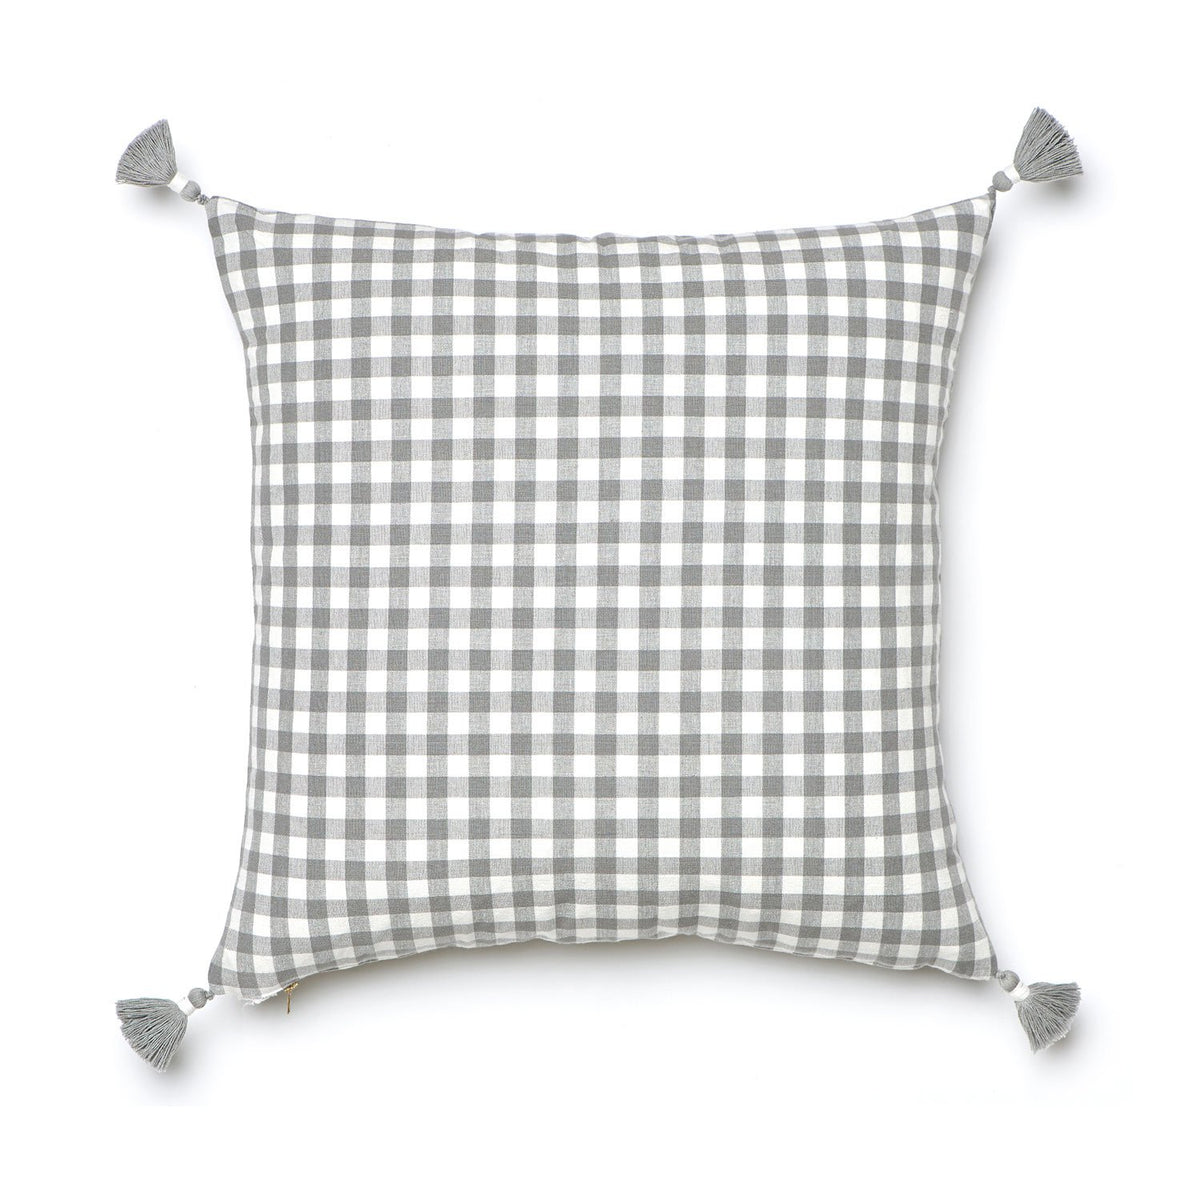 Grey Gingham Pillow with Tassels